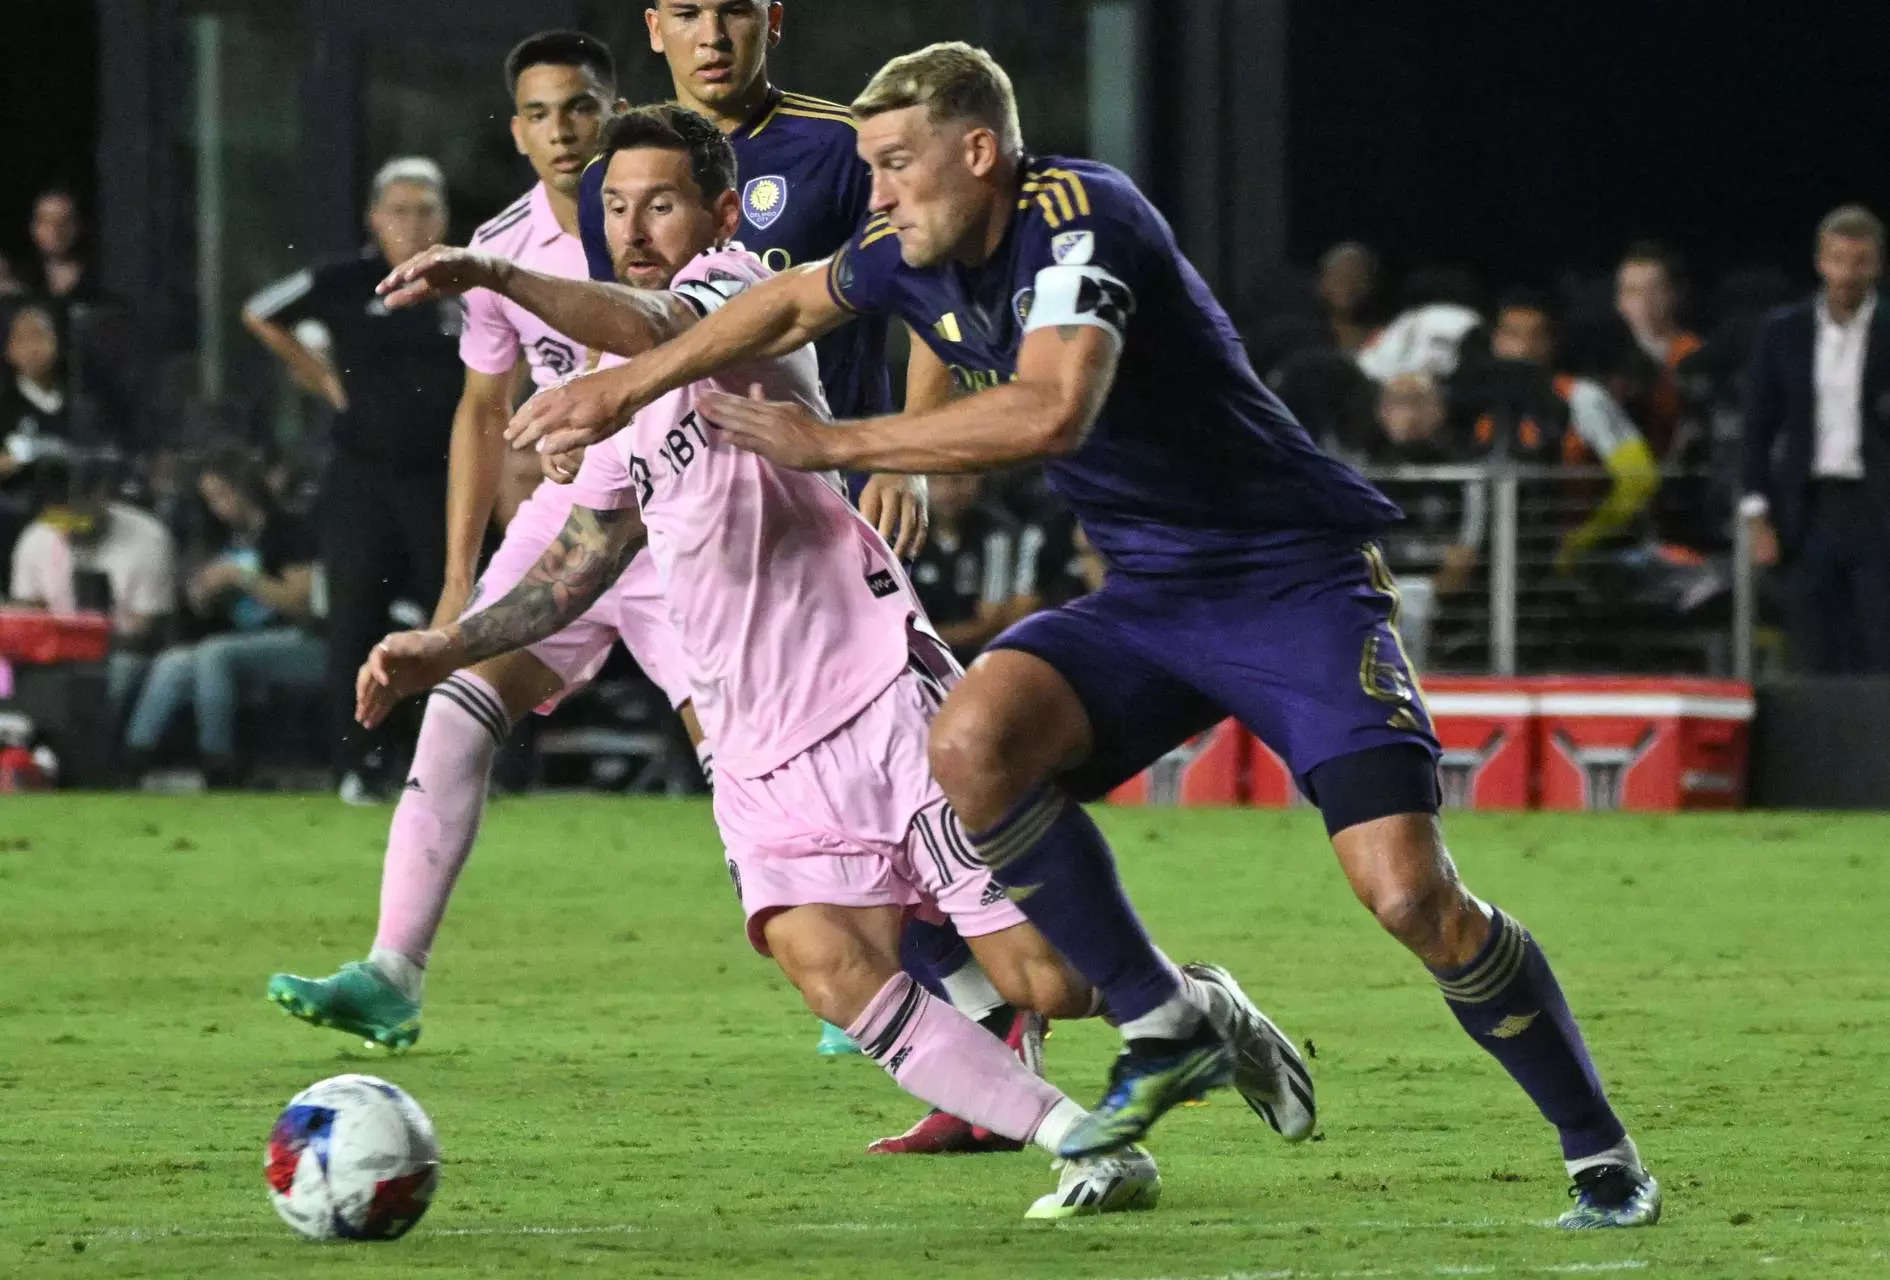 Match report: Orlando City earns 3-1 victory over Inter Miami CF